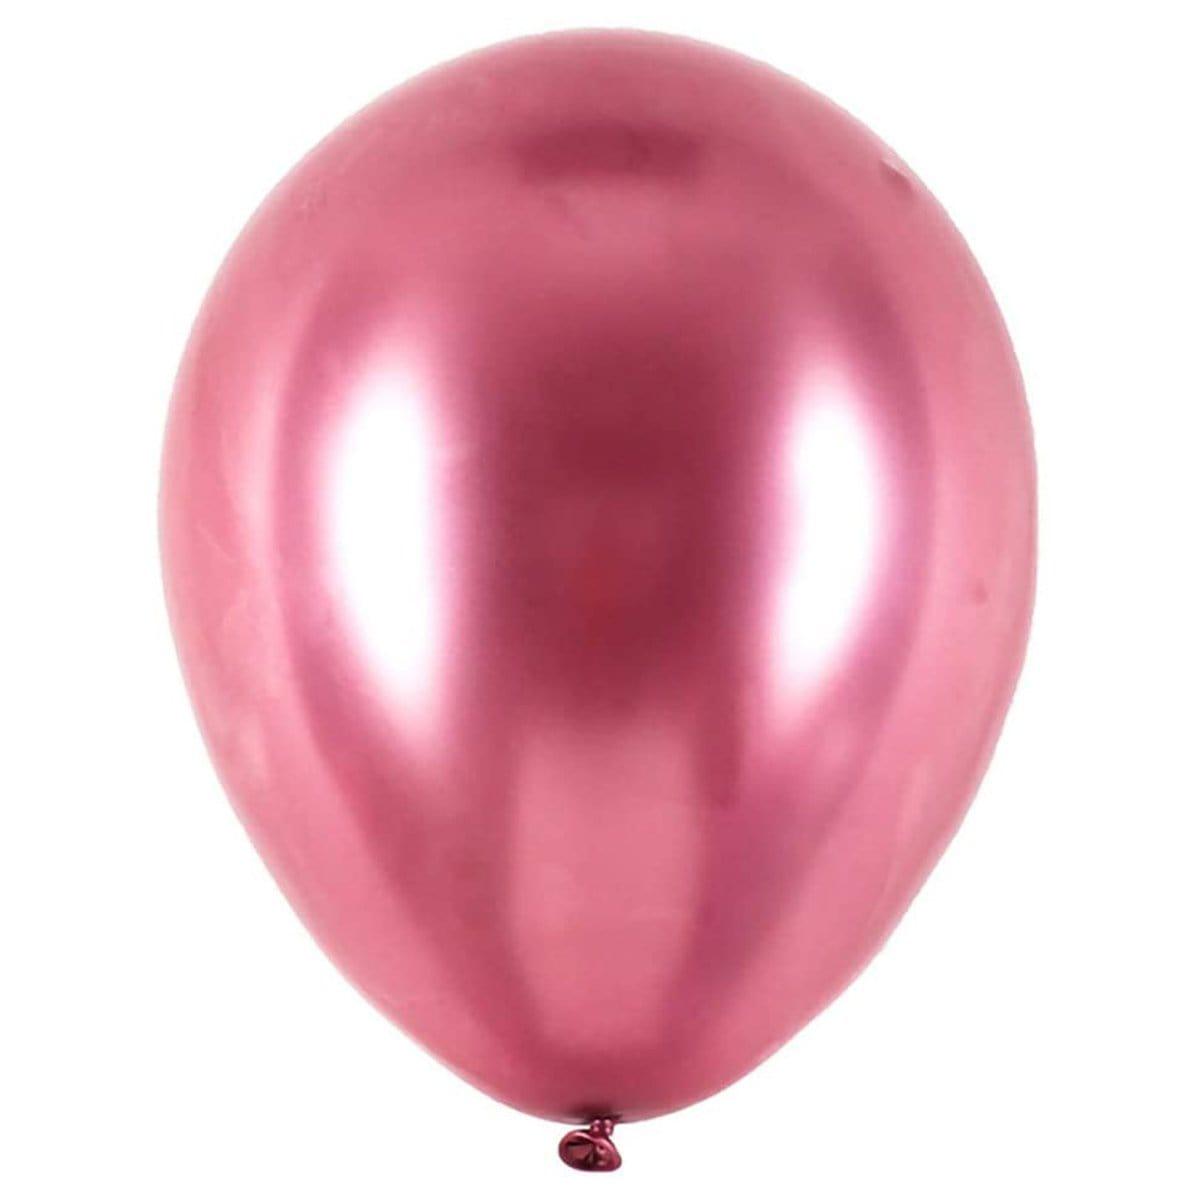 Buy Balloons Red Latex Balloon 5 Inches, Chrome Collection, 100 Count sold at Party Expert